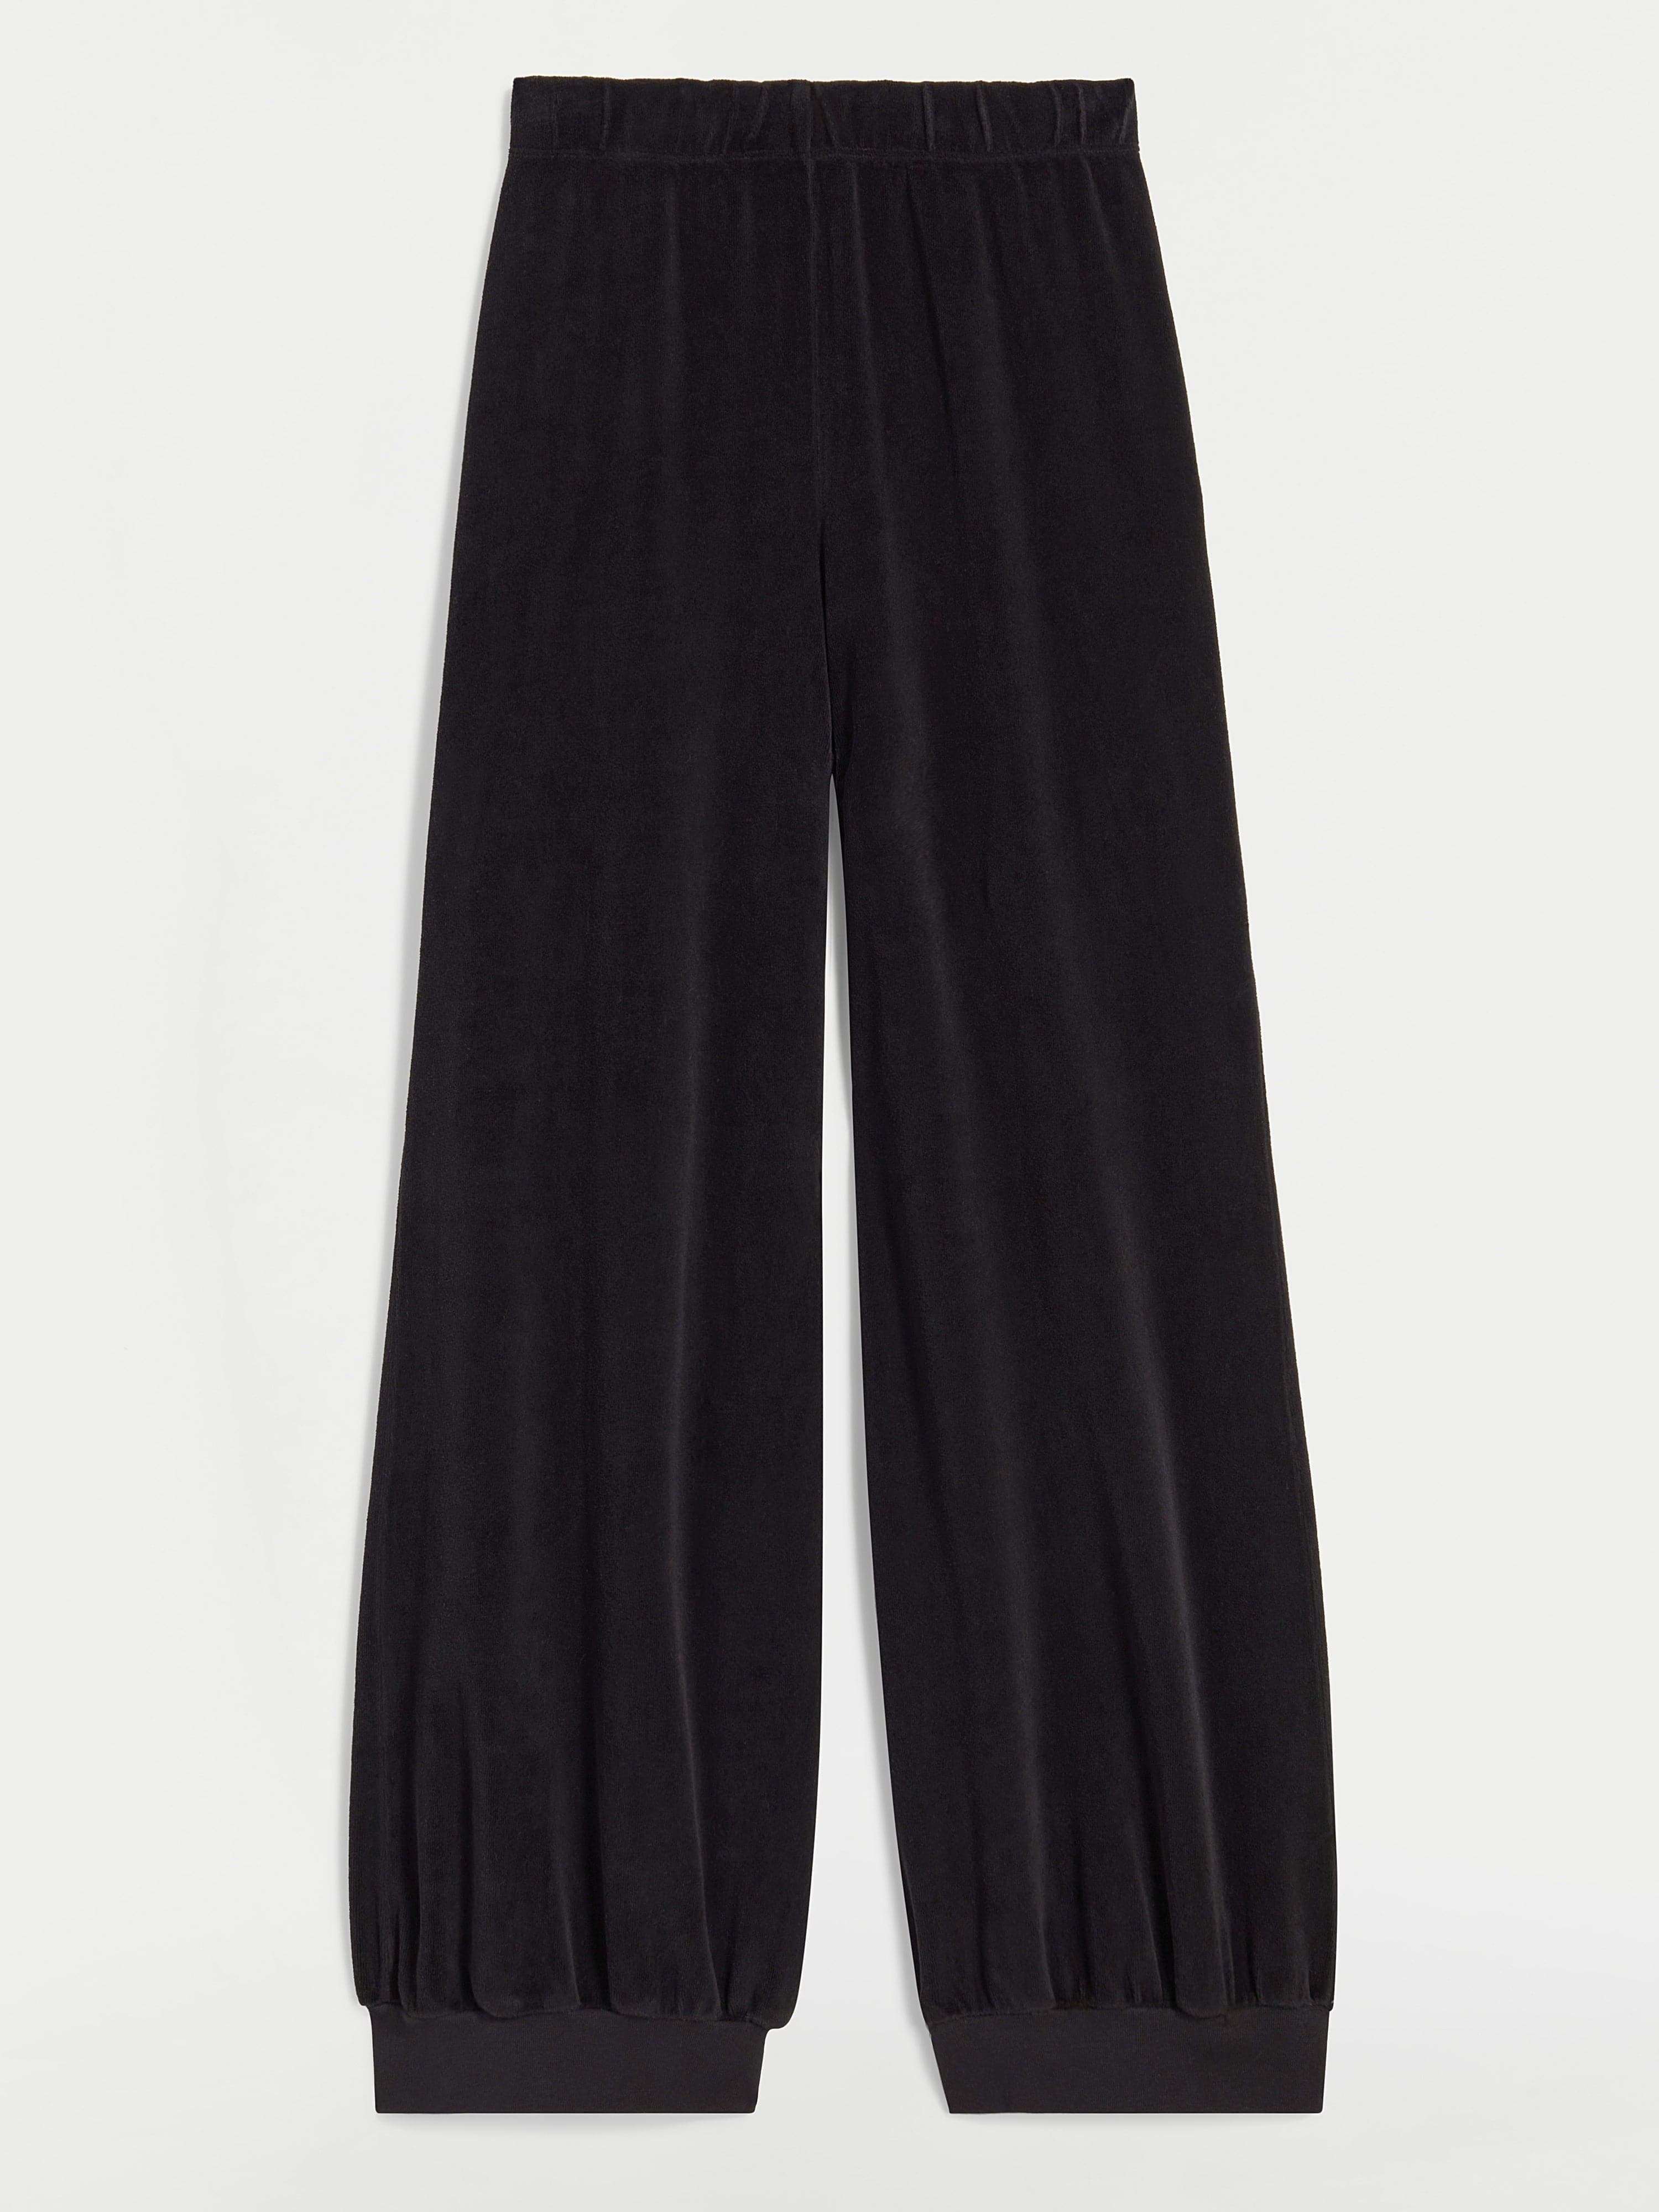 GET THE LOOK : BLACK HAREM PANTS ARE CLASSIC !!! WWW.SHOPPUBLIK.COM #BLACK # HAREM #PANTS #CLASSI…